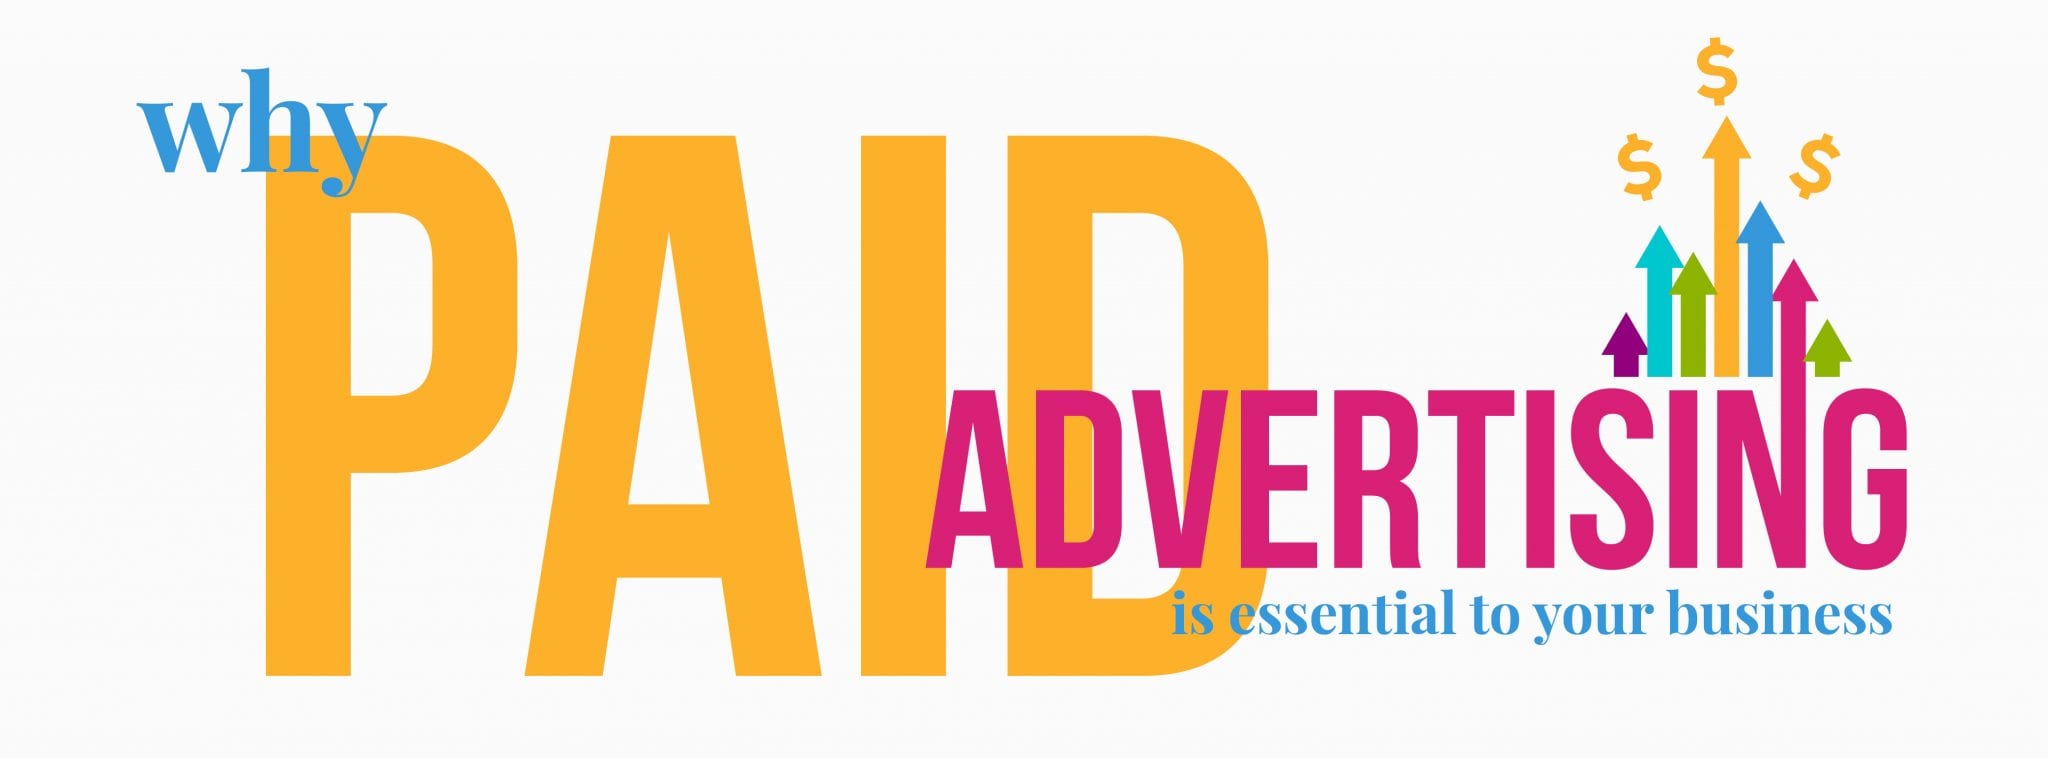 Why Paid Advertising is Essential to your business